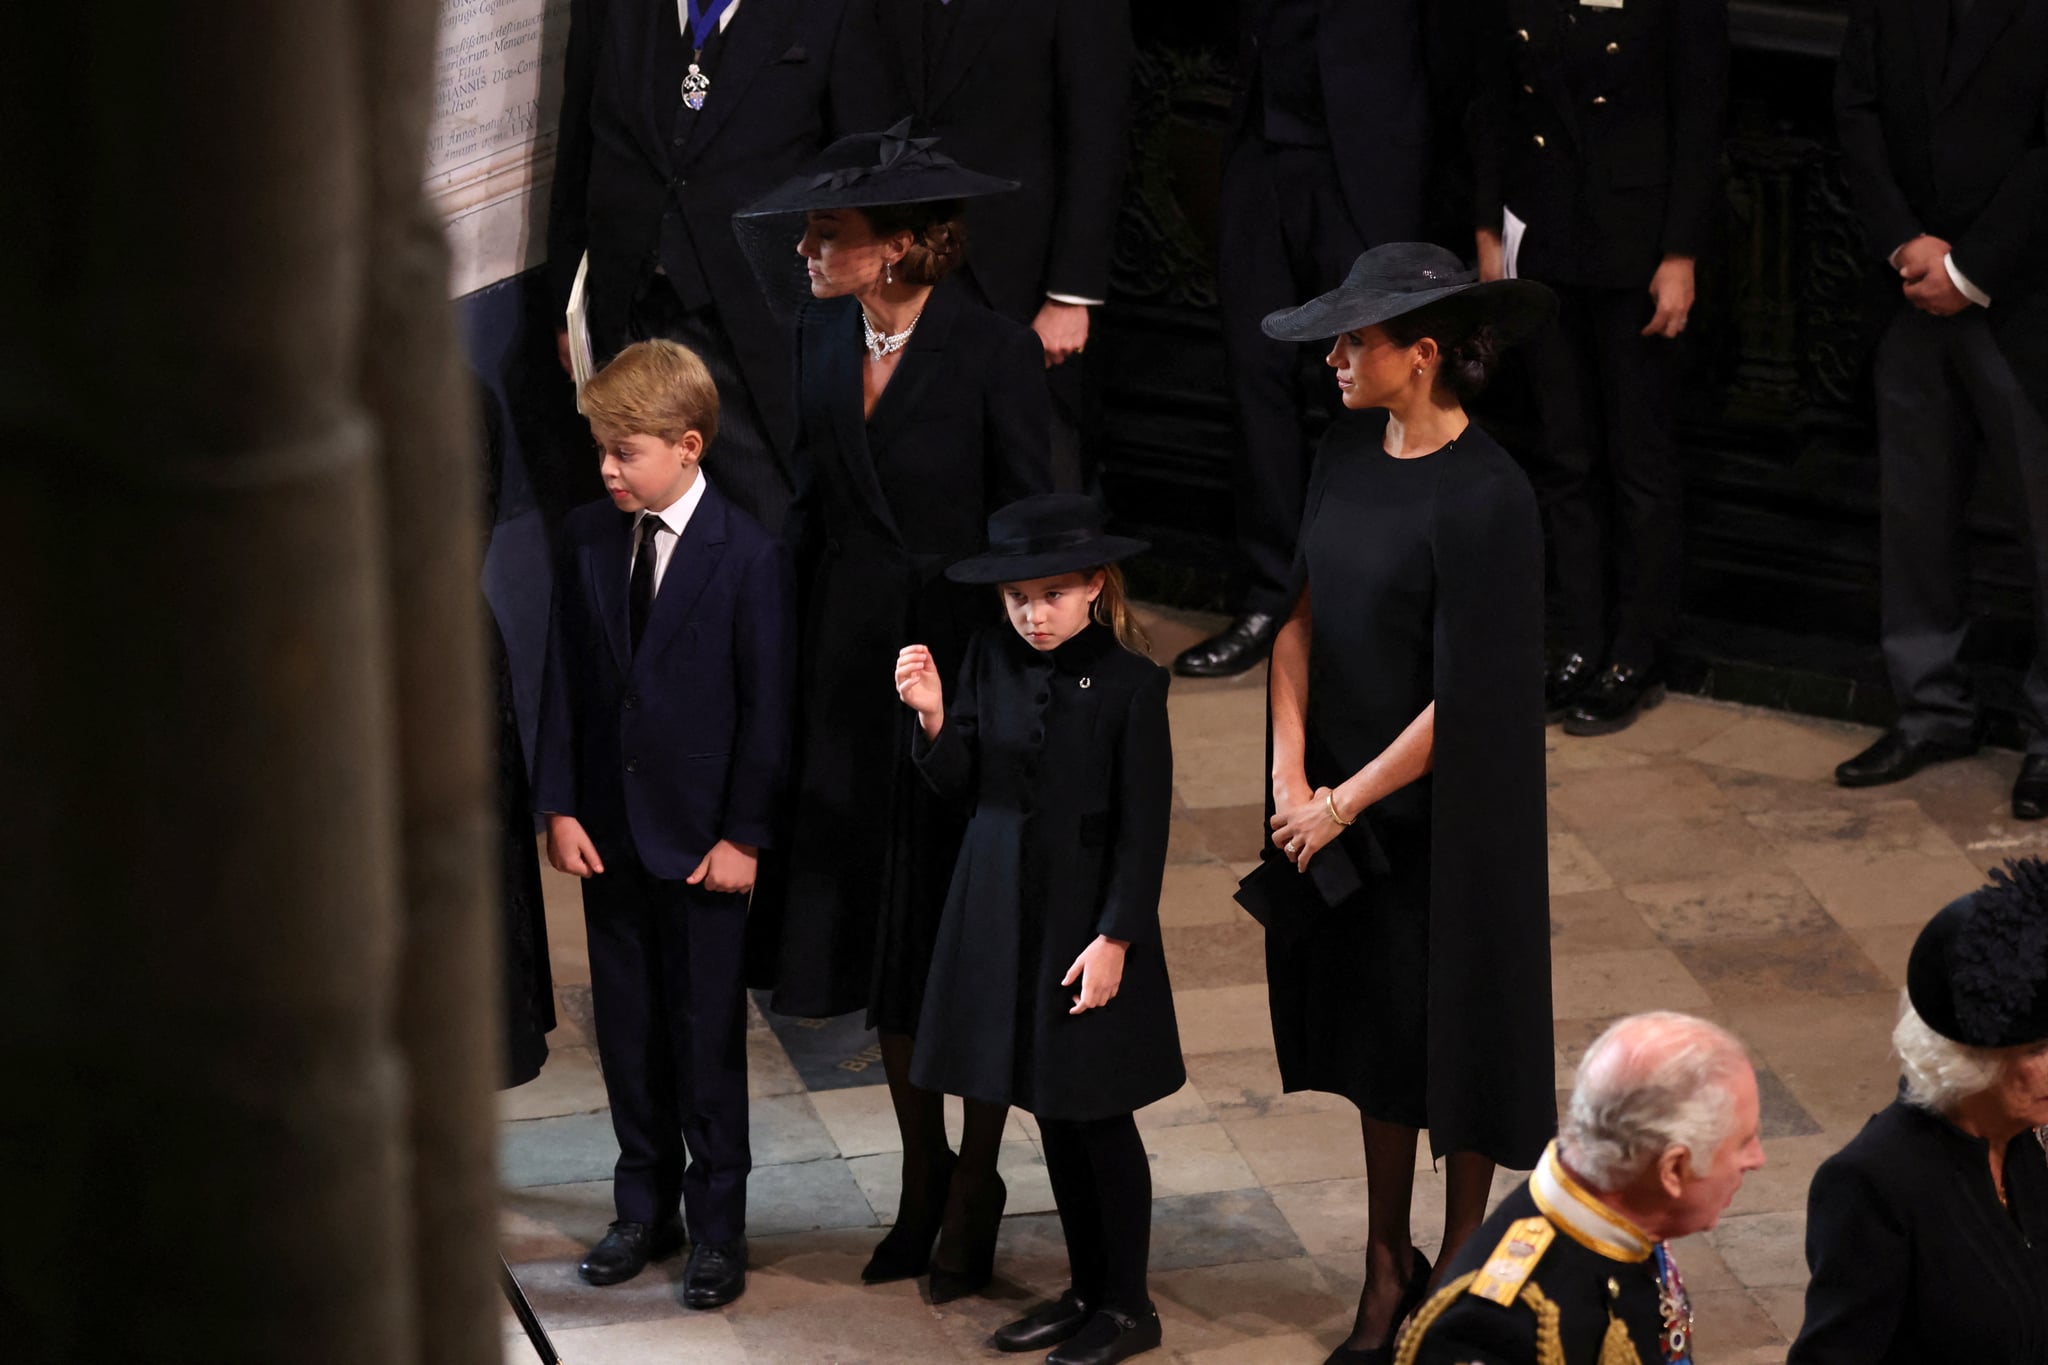 LONDON, ENGLAND - SEPTEMBER 19: King Charles III.  and Camilla, Queen Consort, Catherine, Princess of Wales, Meghan, Duchess of Sussex, Prince George and Princess Charlotte arrive for the State Funeral of Queen Elizabeth II to be held at Westminster Abbey on September 19, 2022 in London, England.  Elizabeth Alexandra Mary Windsor was born on April 21, 1926 in Bruton Street, Mayfair, London.  She married Prince Philip in 1947 and acceded to the throne of the United Kingdom and Commonwealth on 6 February 1952 after the death of her father, King George VI.  Queen Elizabeth II died at Balmoral Castle in Scotland on 8 September 2022 and is succeeded by her eldest son, King Charles III.  (Photo by Phil Noble - WPA Pool/Getty Images)